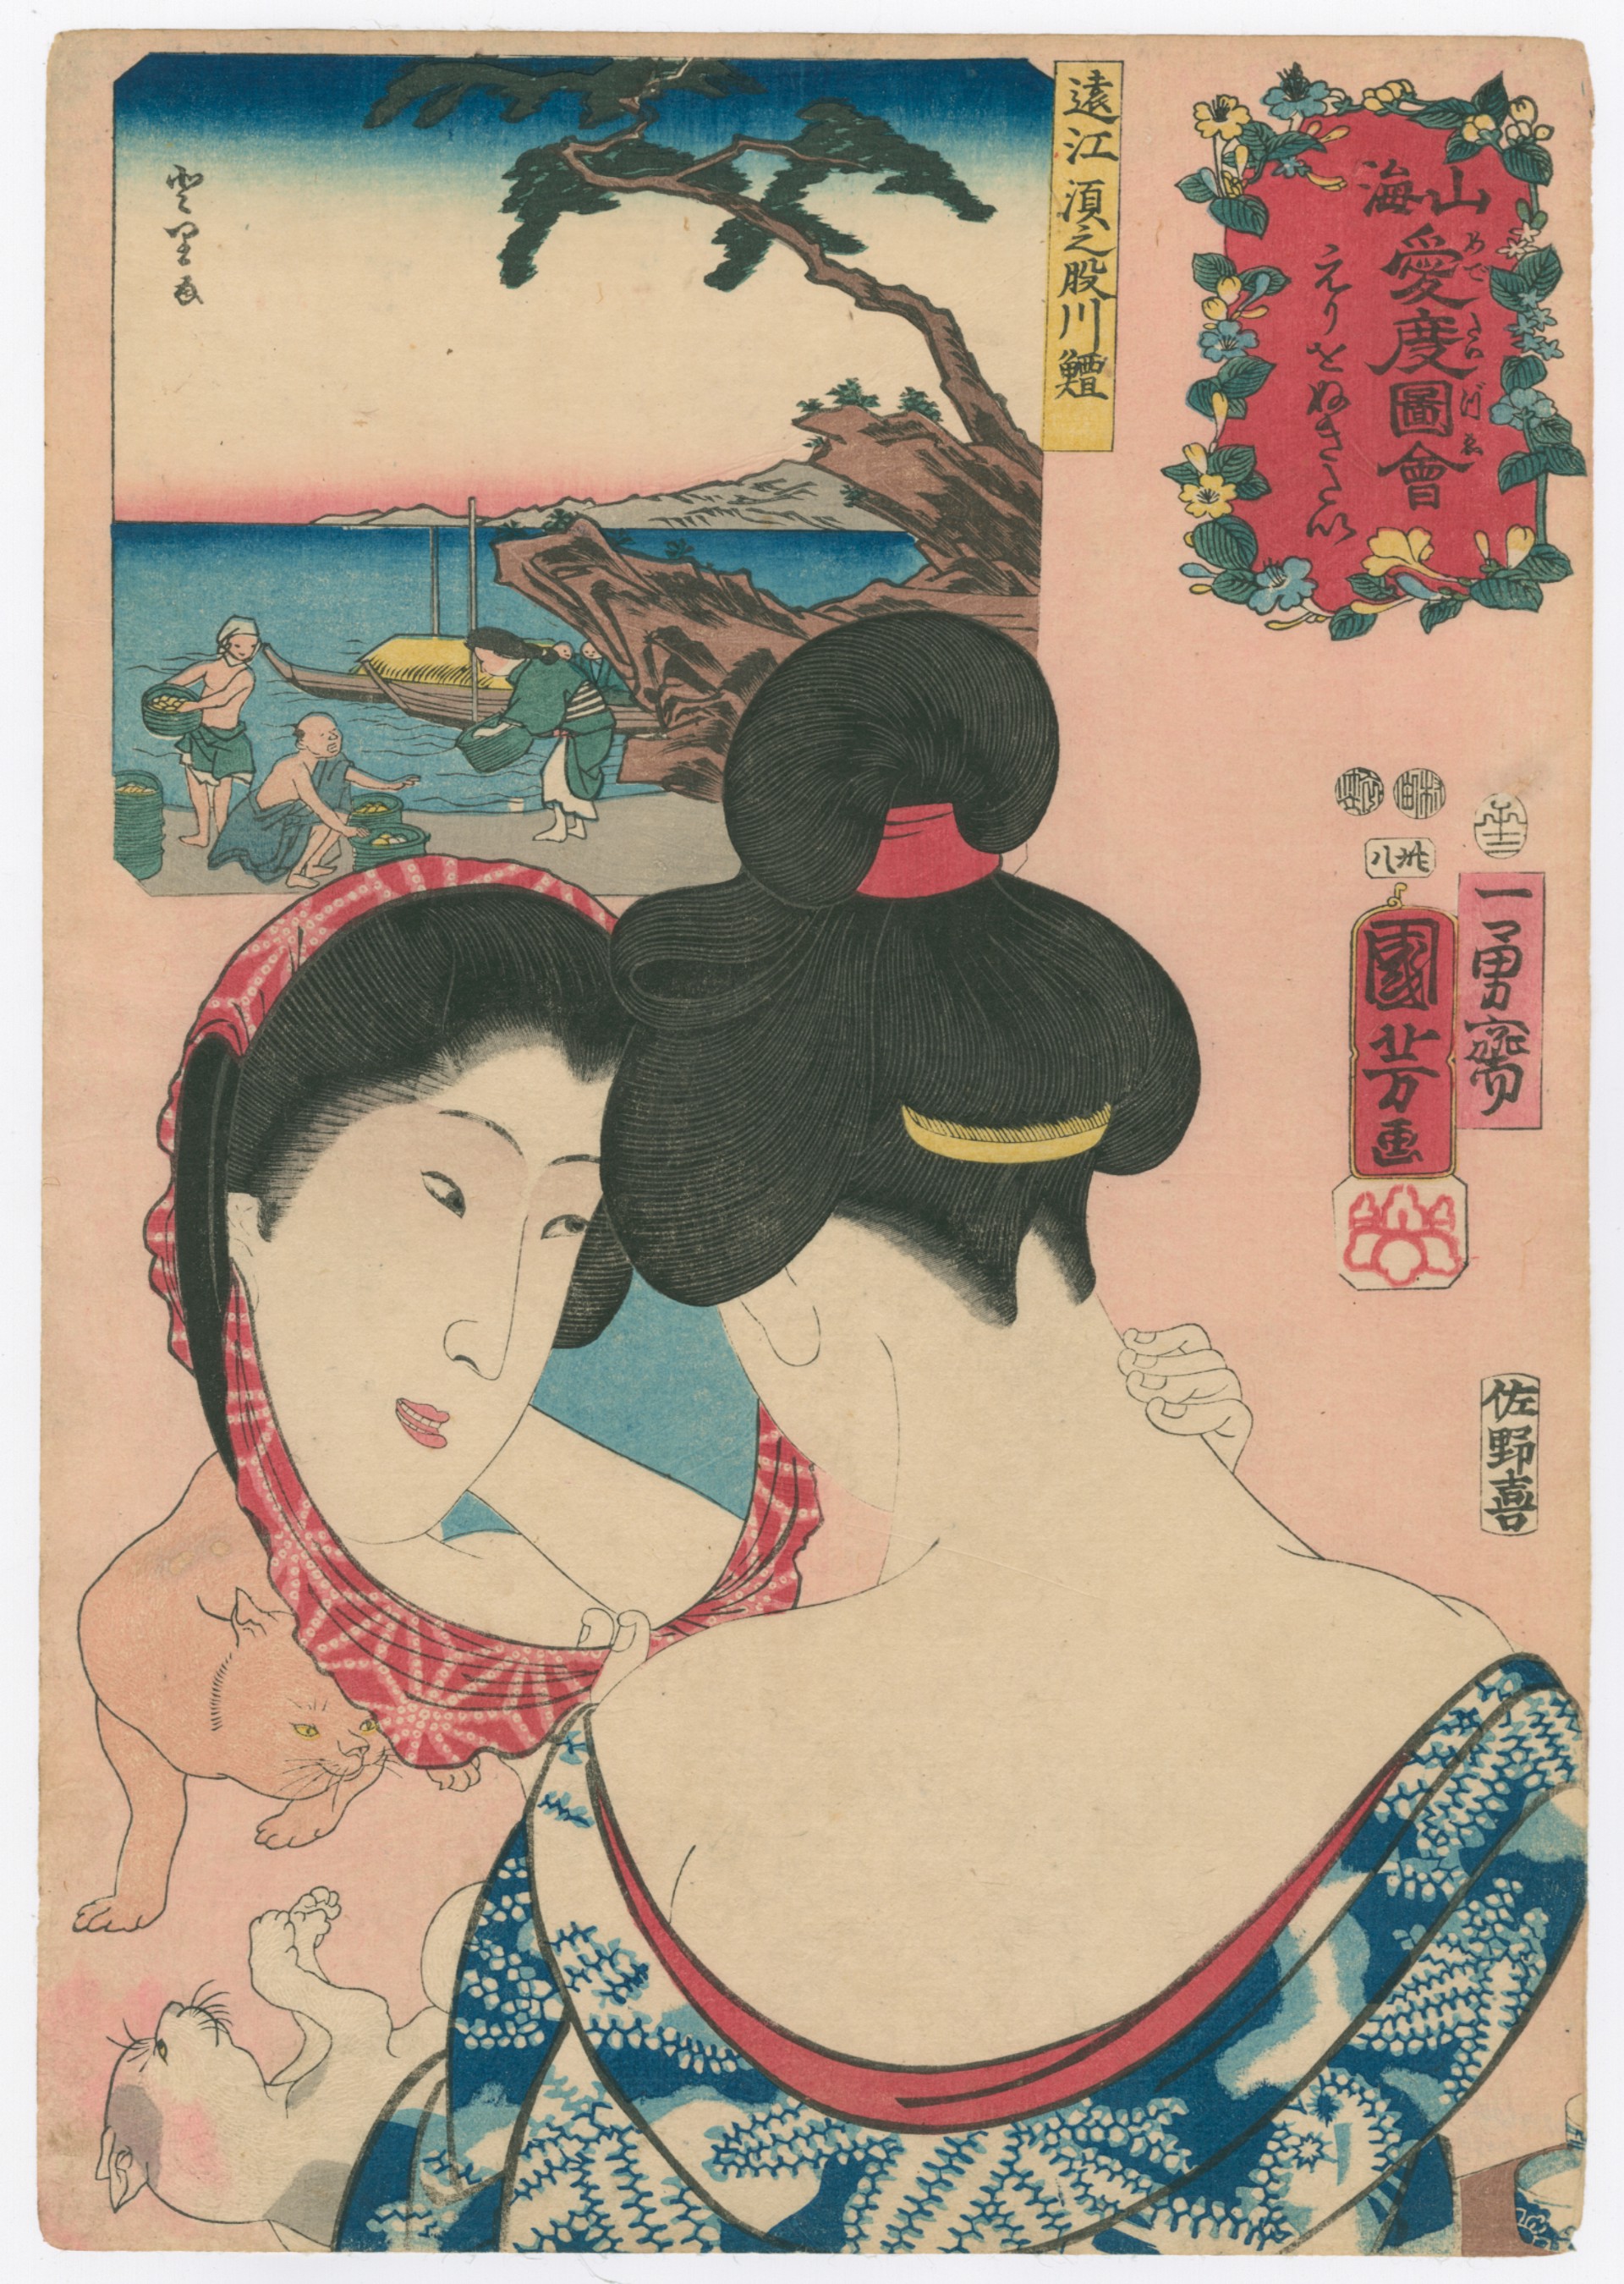 #38 - Product - Air Bladders of Fish from the Sunomata River, Totomi Province. Desire of Feeling - Wanting to Tweeze the Nape of the Neck. Celebrated Products of Mountains and Seas by Kuniyoshi